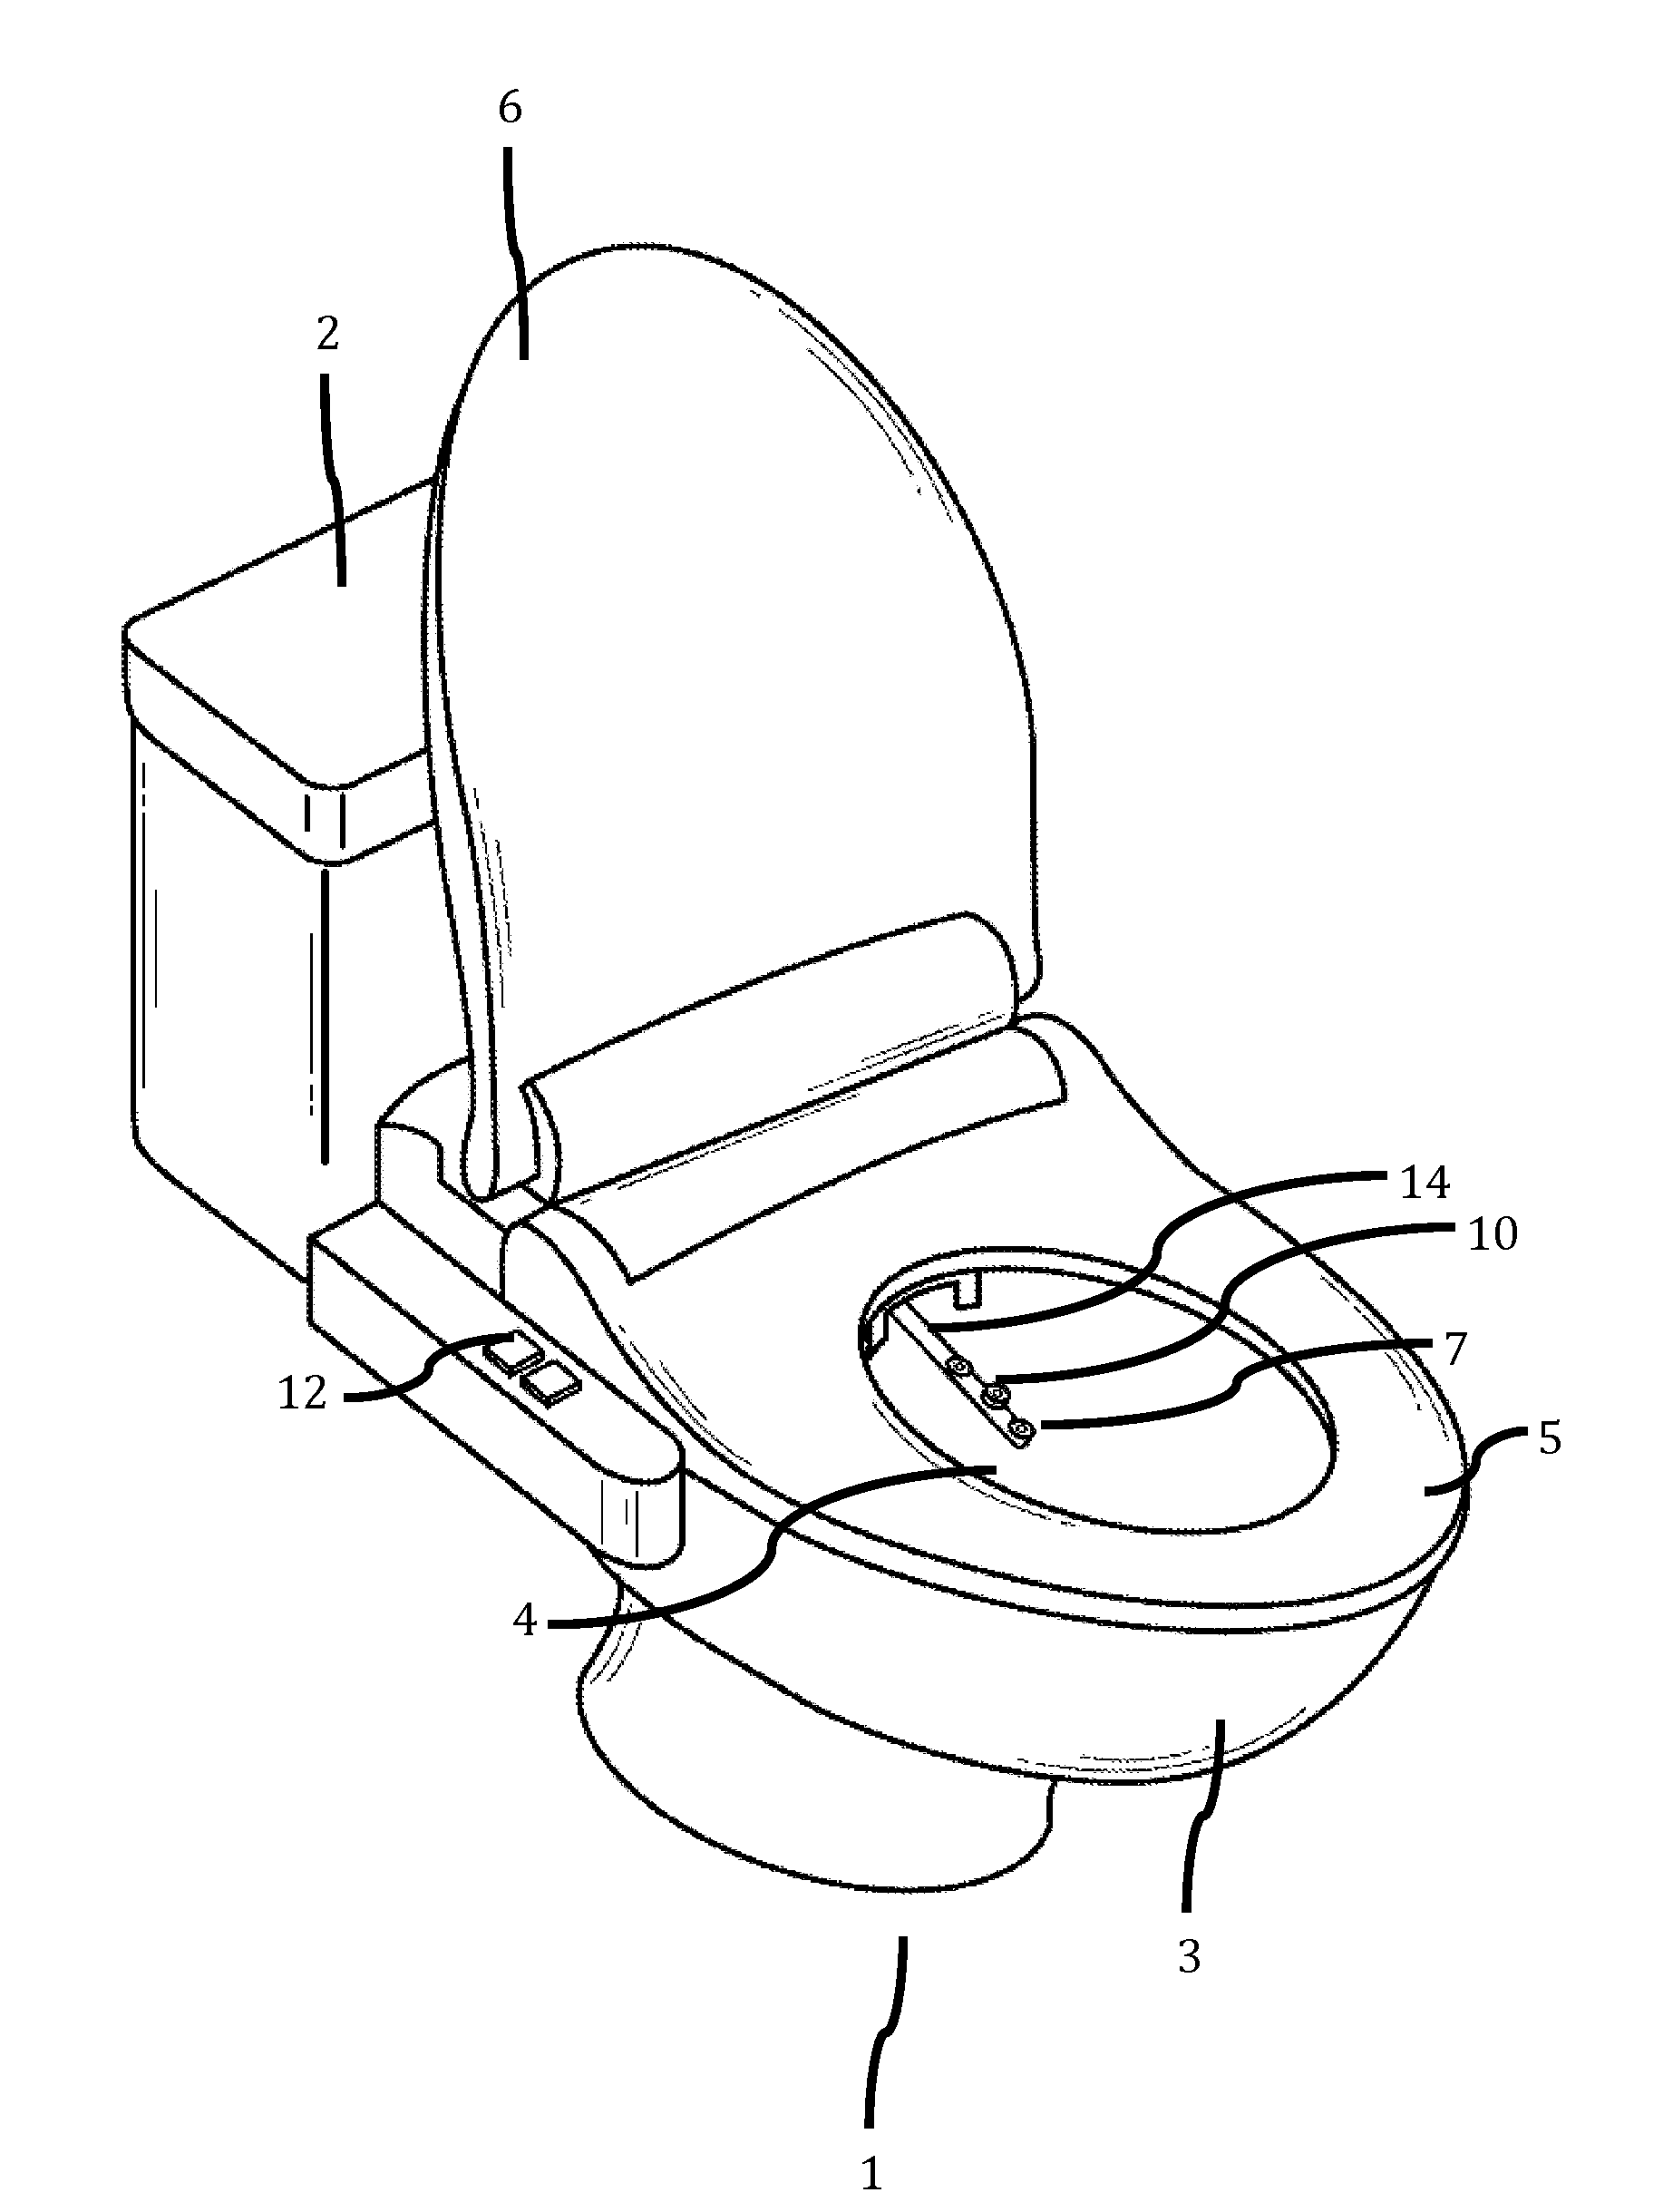 Electronic automatically adjusting bidet with visual object recognition software